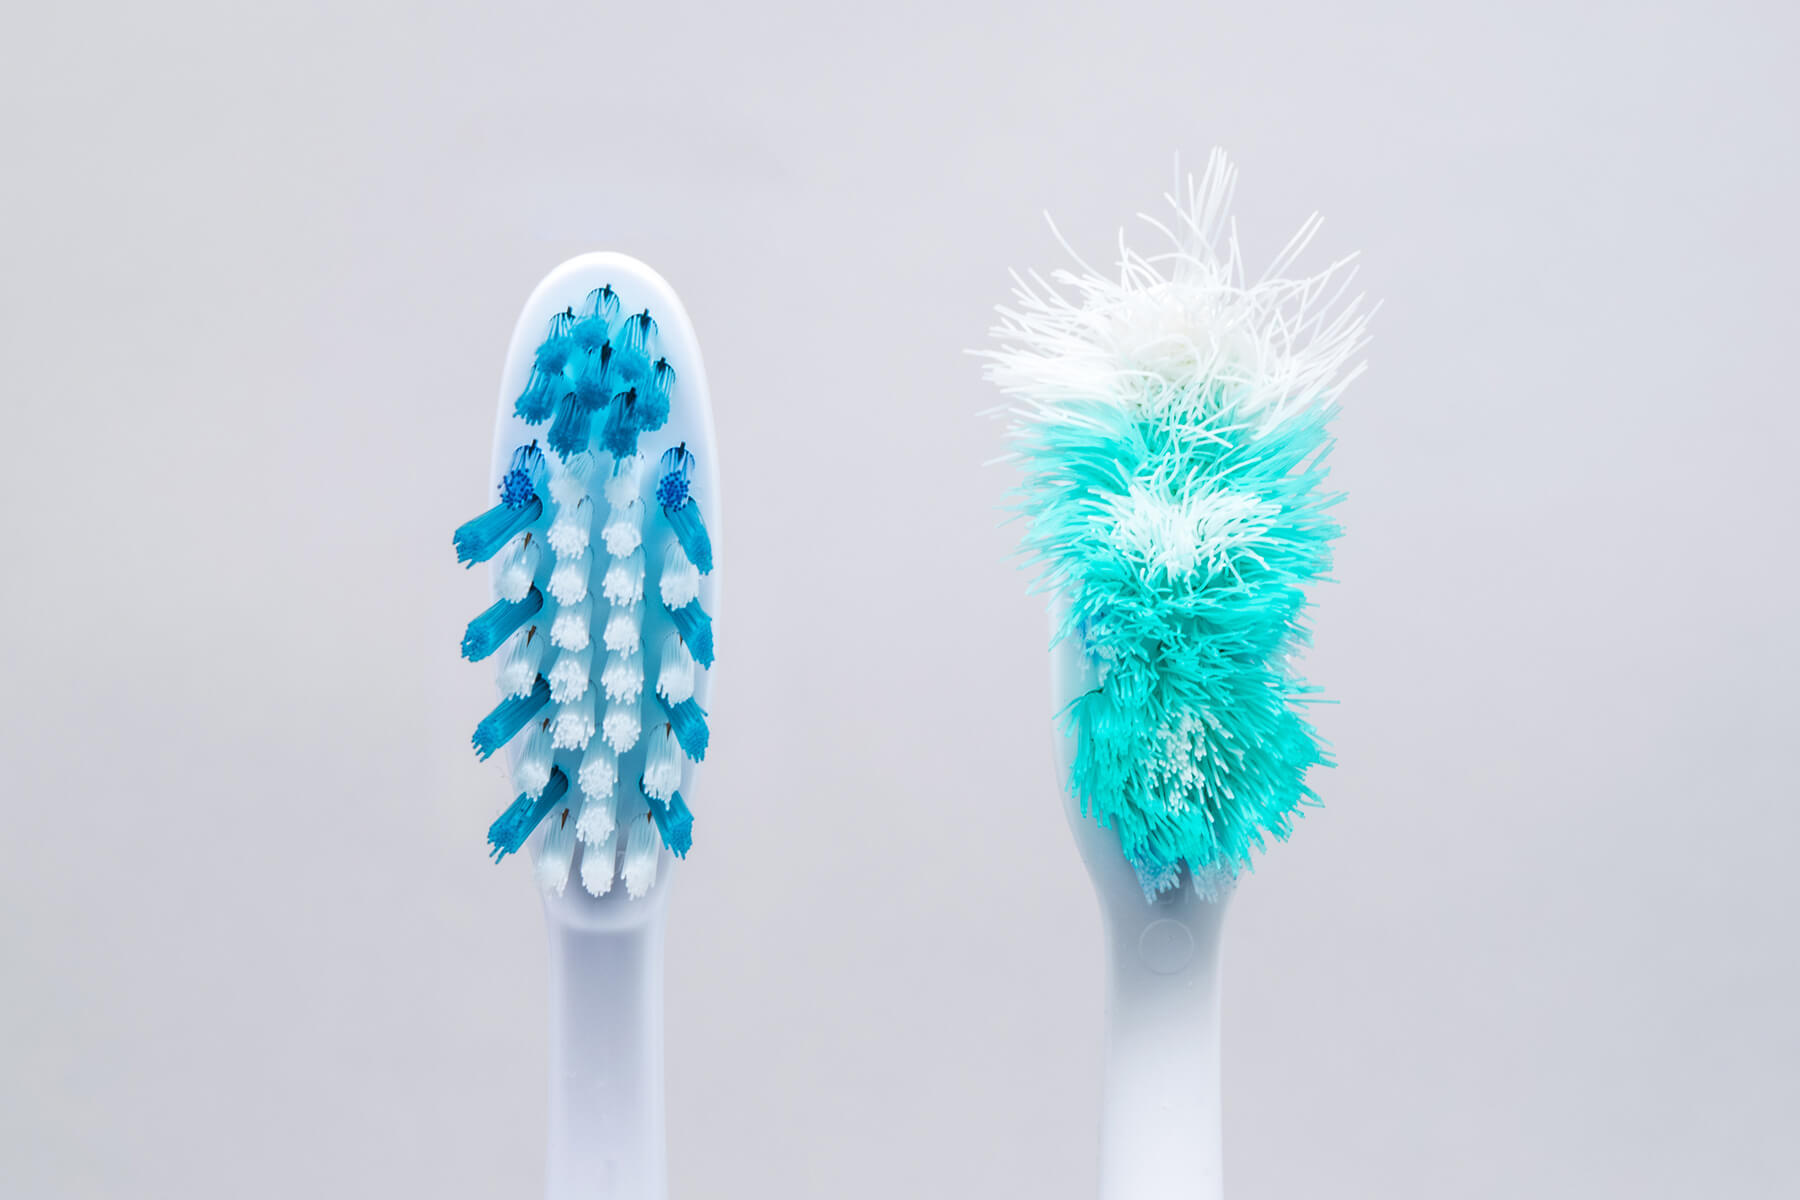 Brand new toothbrush next to old frayed toothbrush